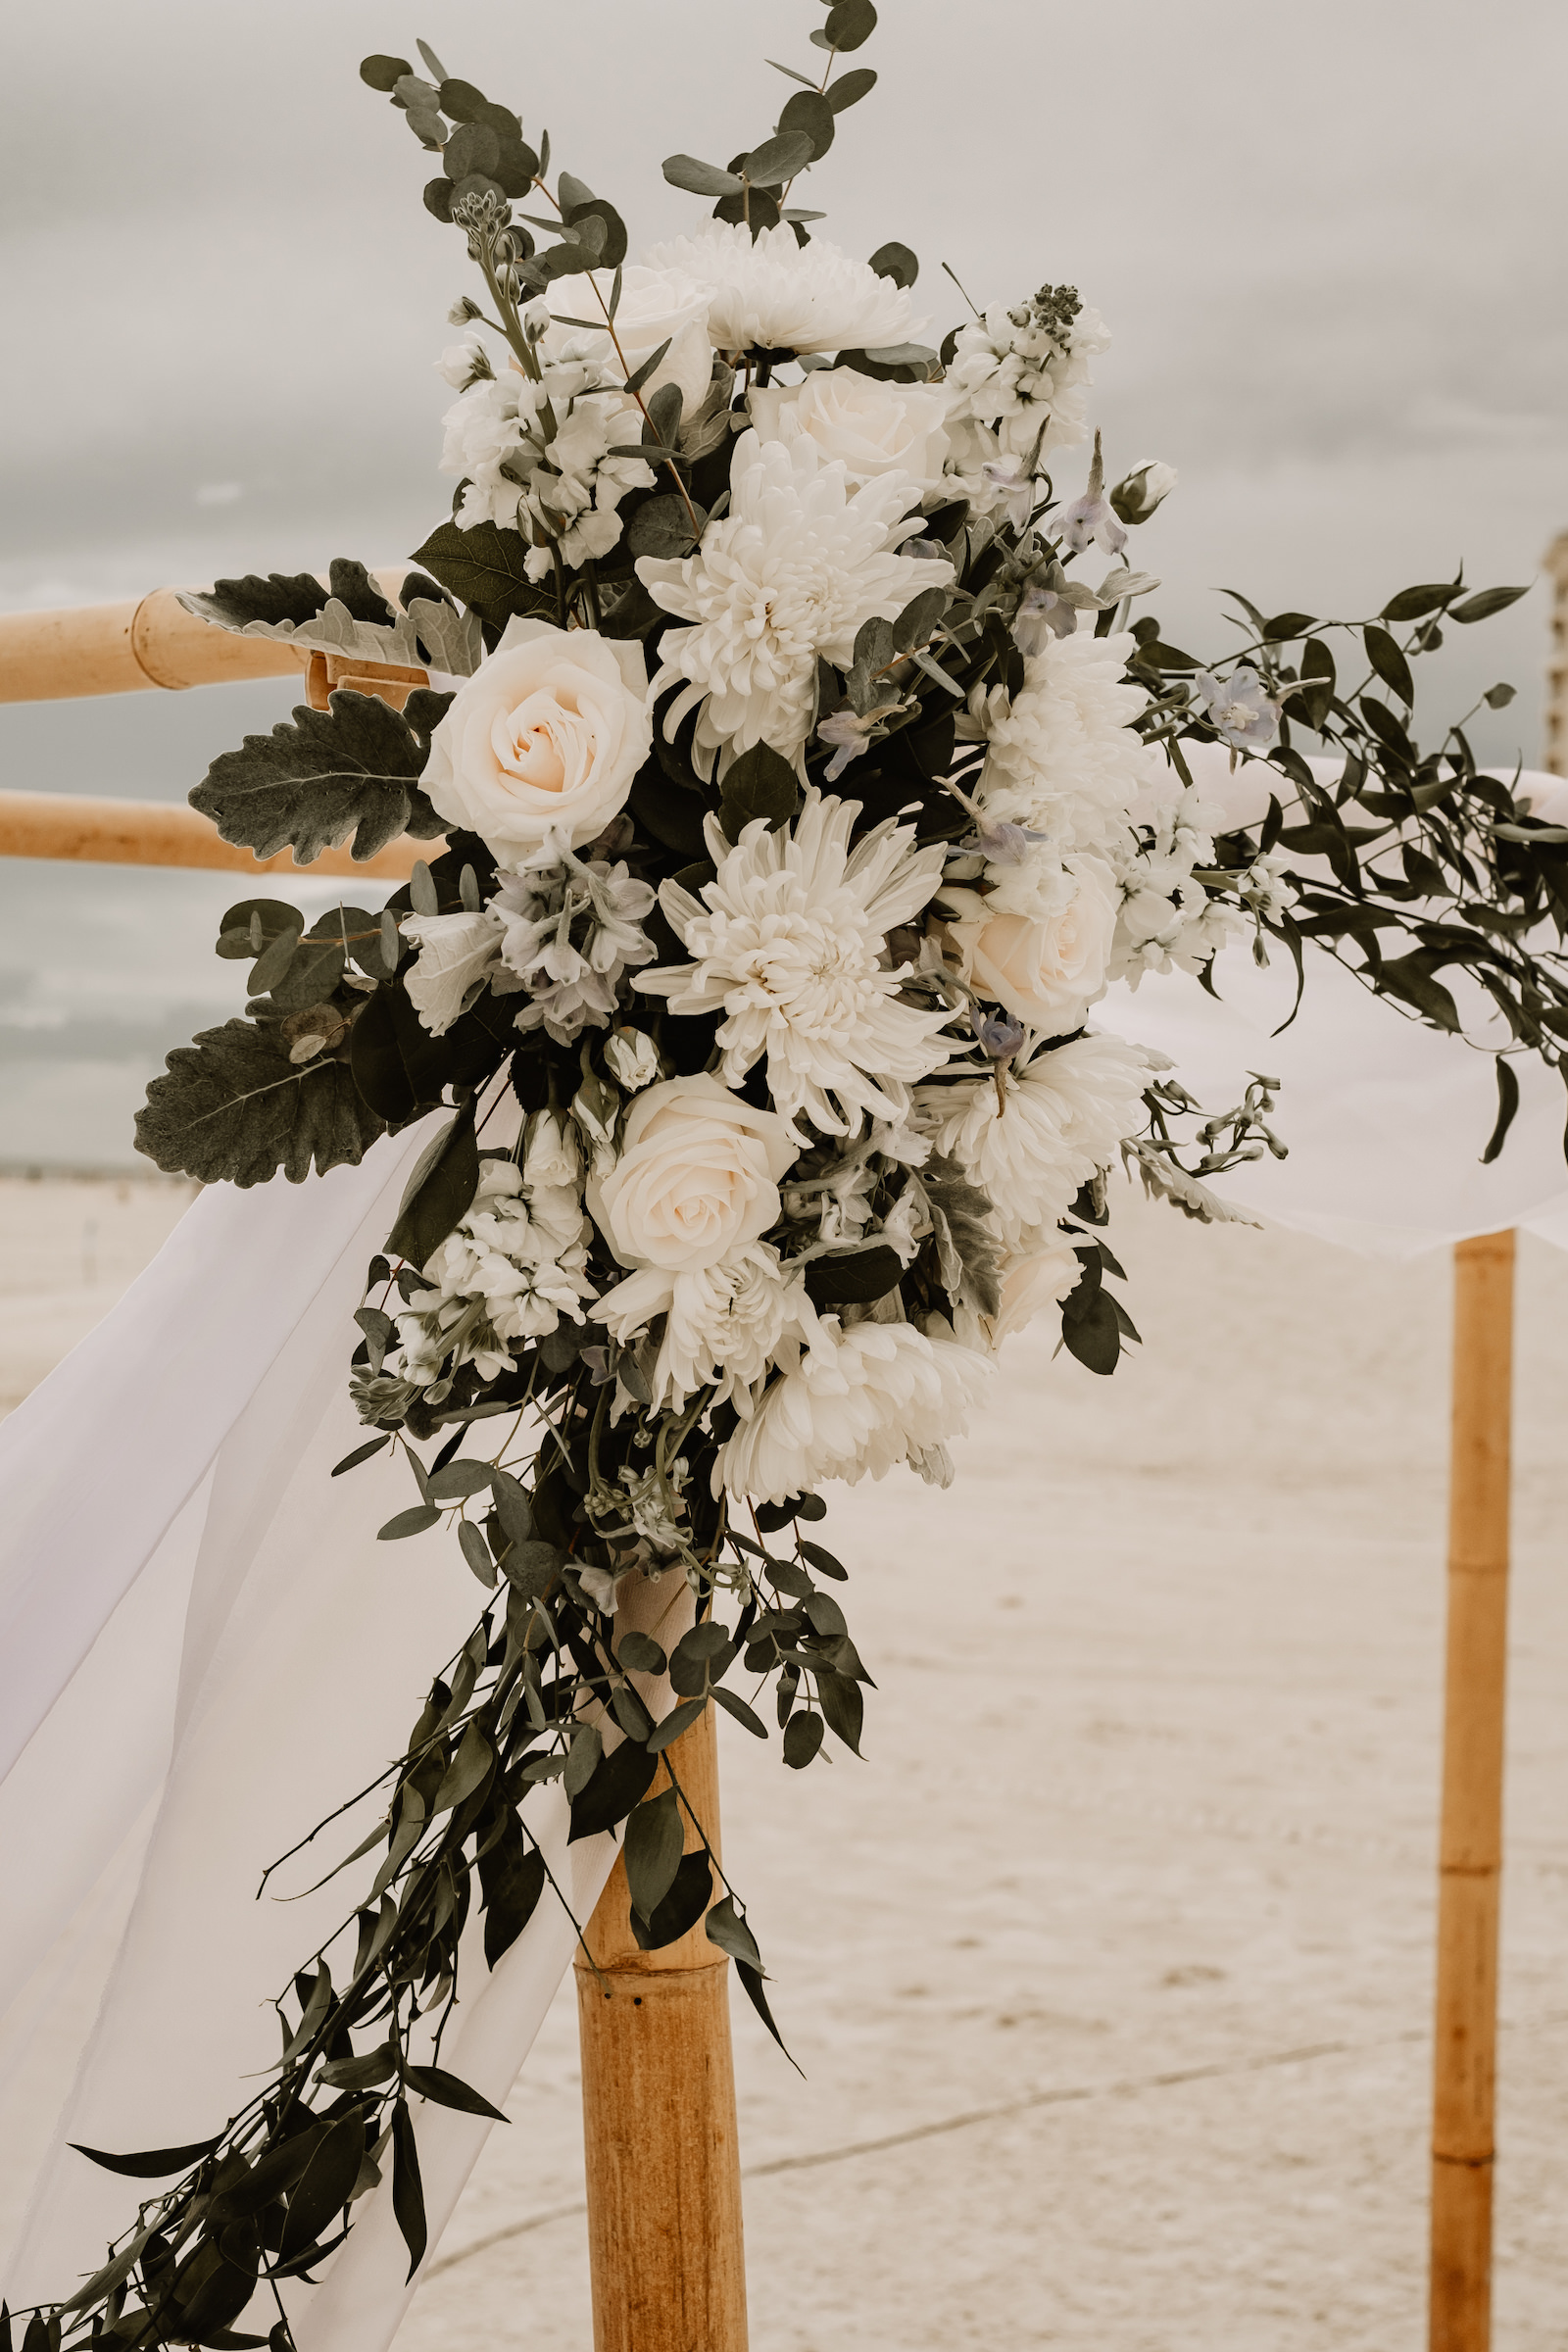 Beach Wedding Ceremony Bamboo Arch with Sheer Draping and Greenery Floral Arrangement Tie Backs with White Roses Chrysanthemums and Stock